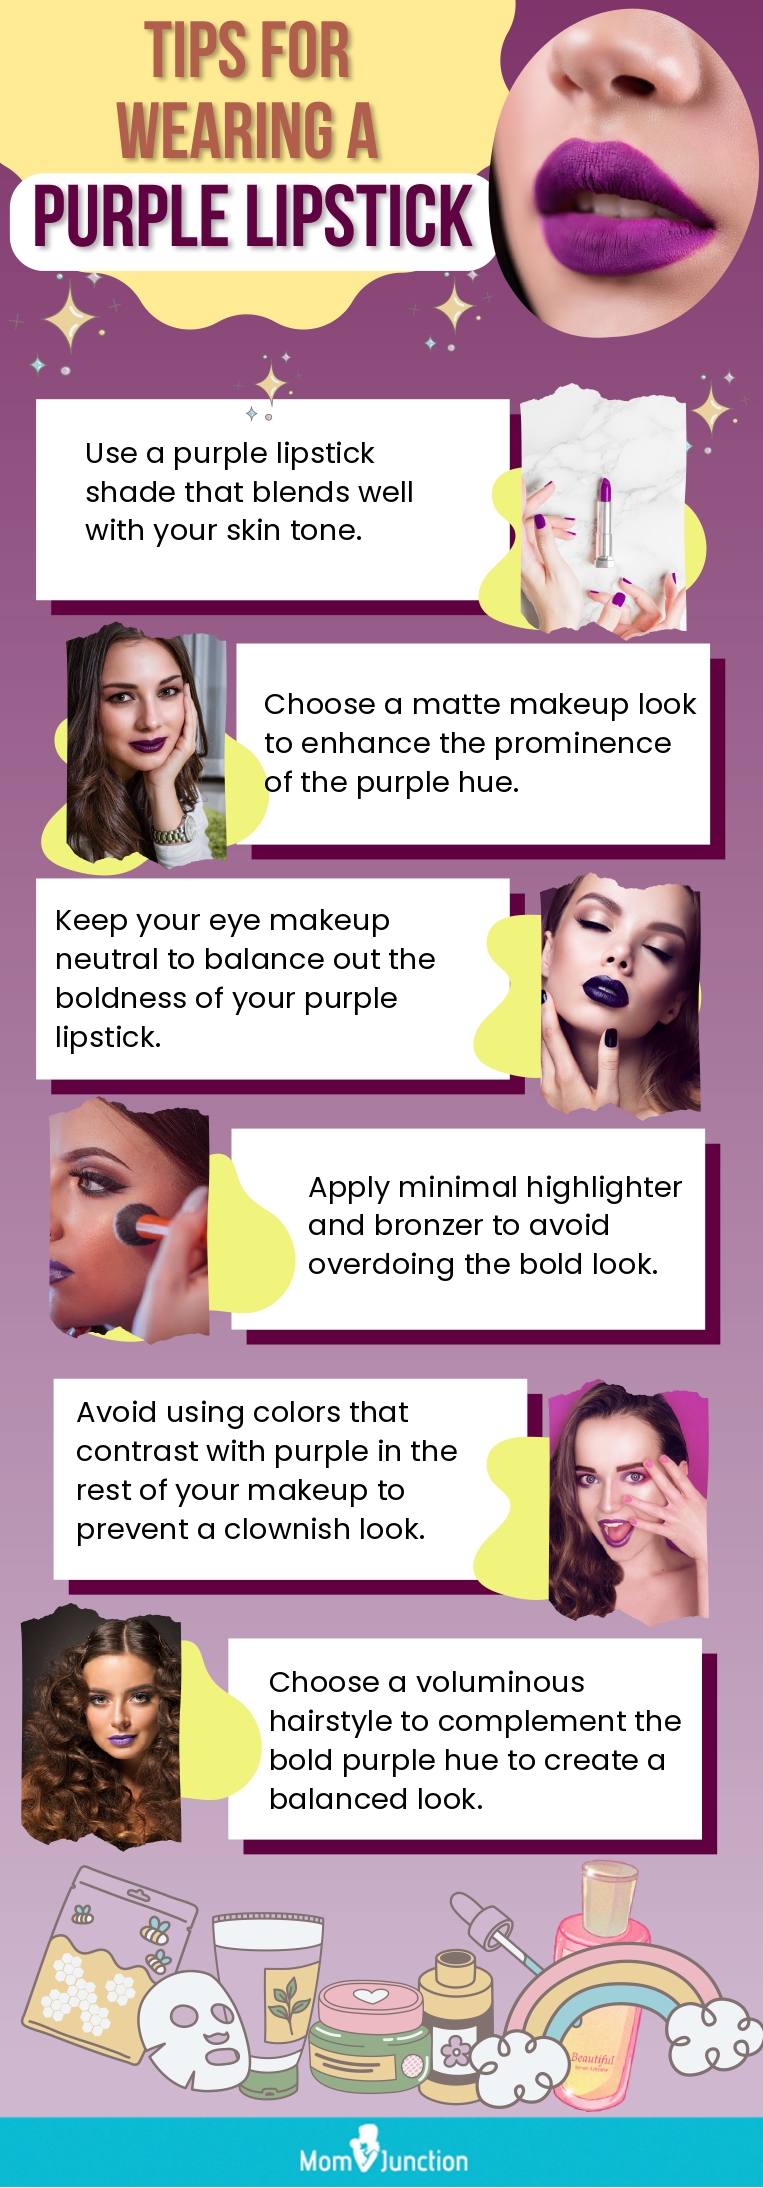 Tips For Wearing A Purple Lipstick (infographic)